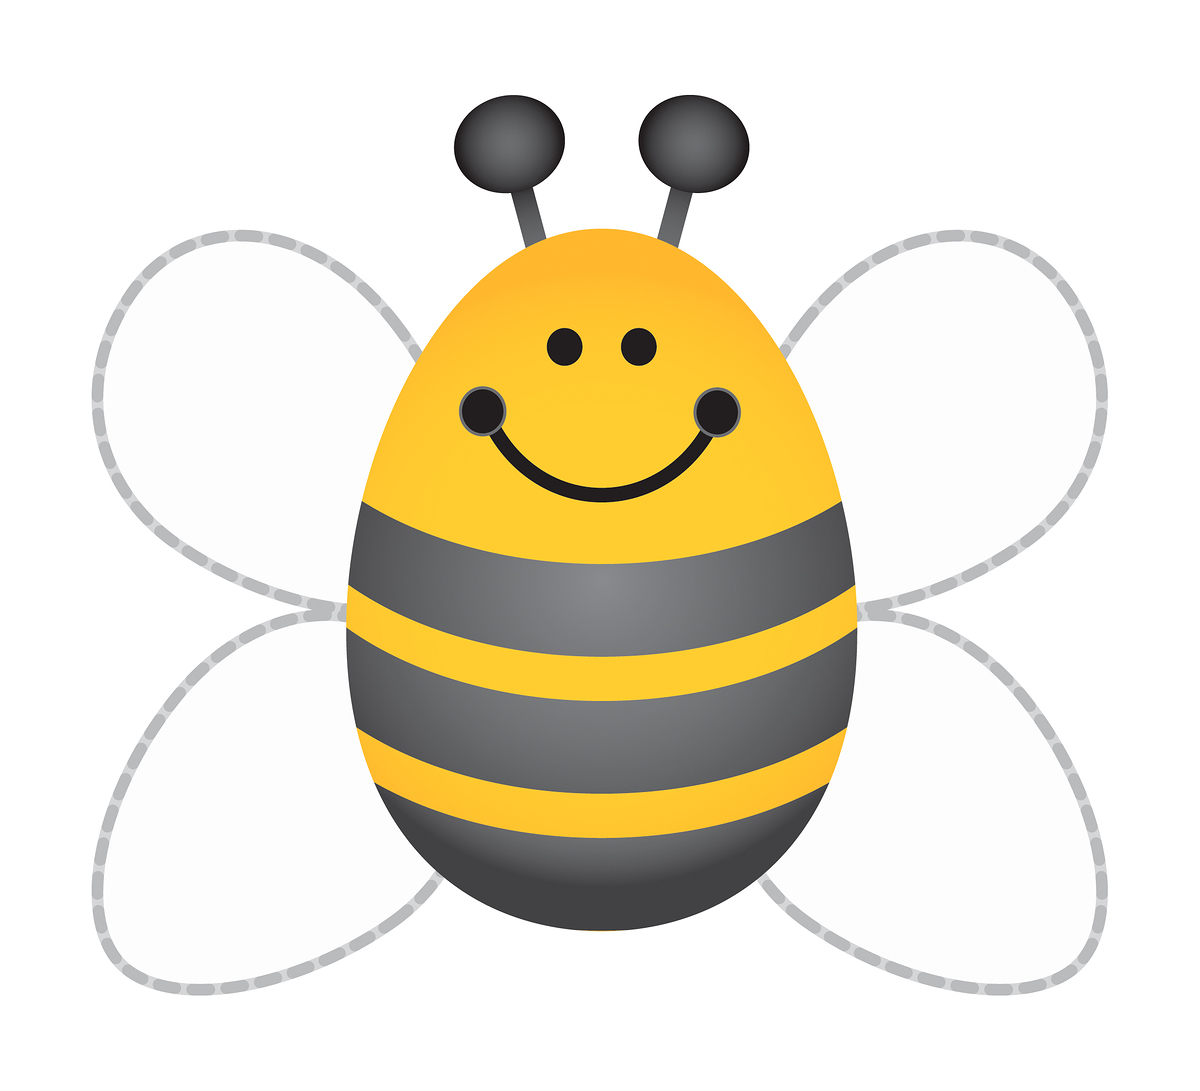 bumble-bee-images-free-cliparts-co